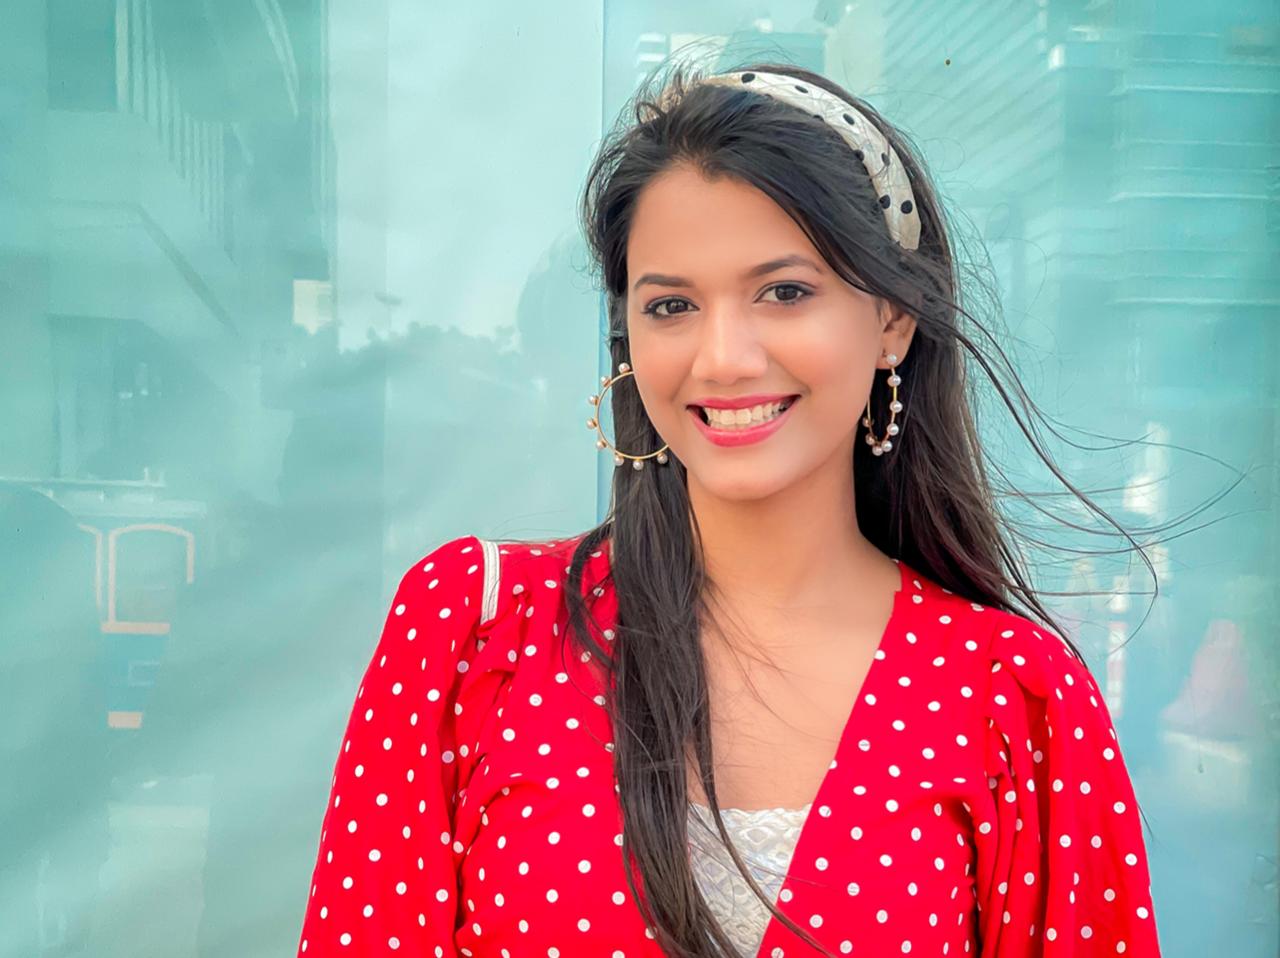 “Beauty with Brain” Female Social media influencer and Youtuber Saloni Mittal’s Incredible Success Story